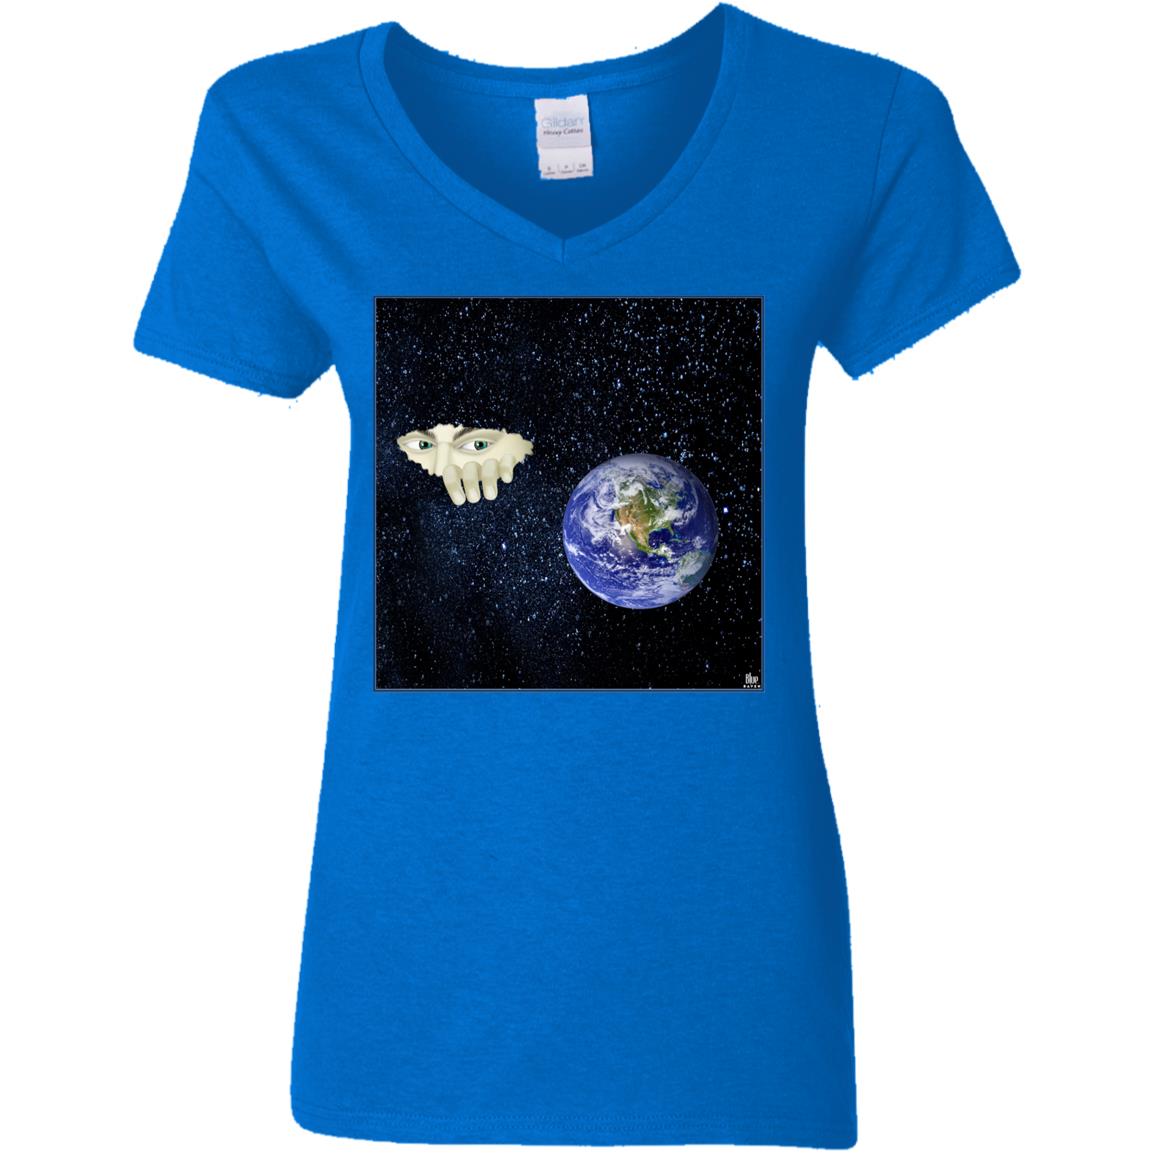 Somewhere Out There - Women's V-Neck T Shirt